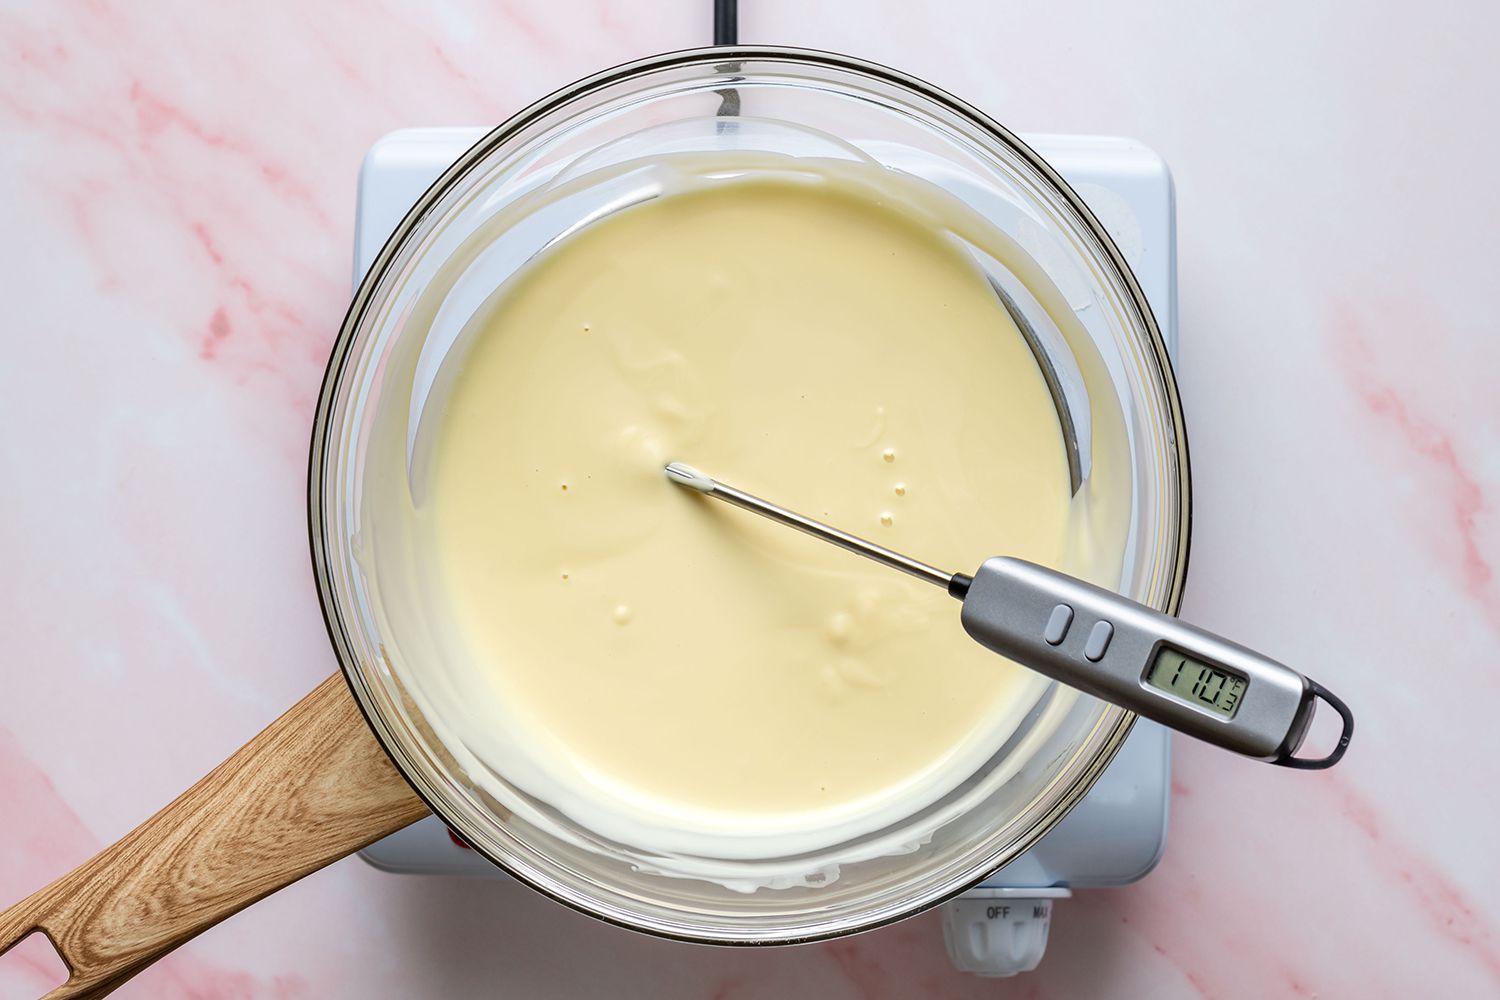 thermometer in a bowl of melted white chocolate